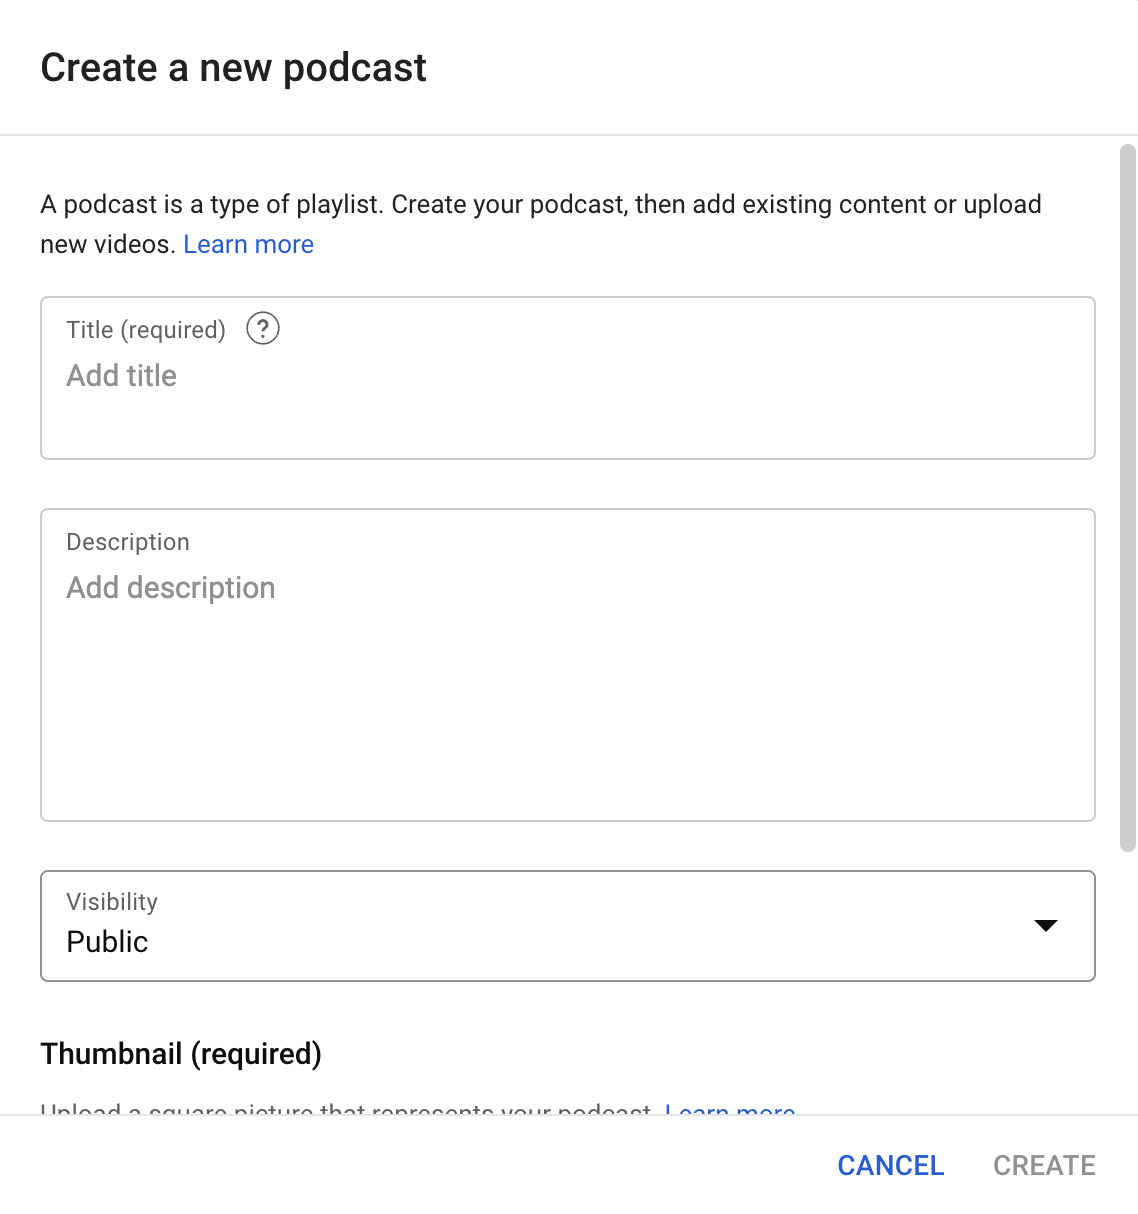 Entering details to publish a podcast on YouTube